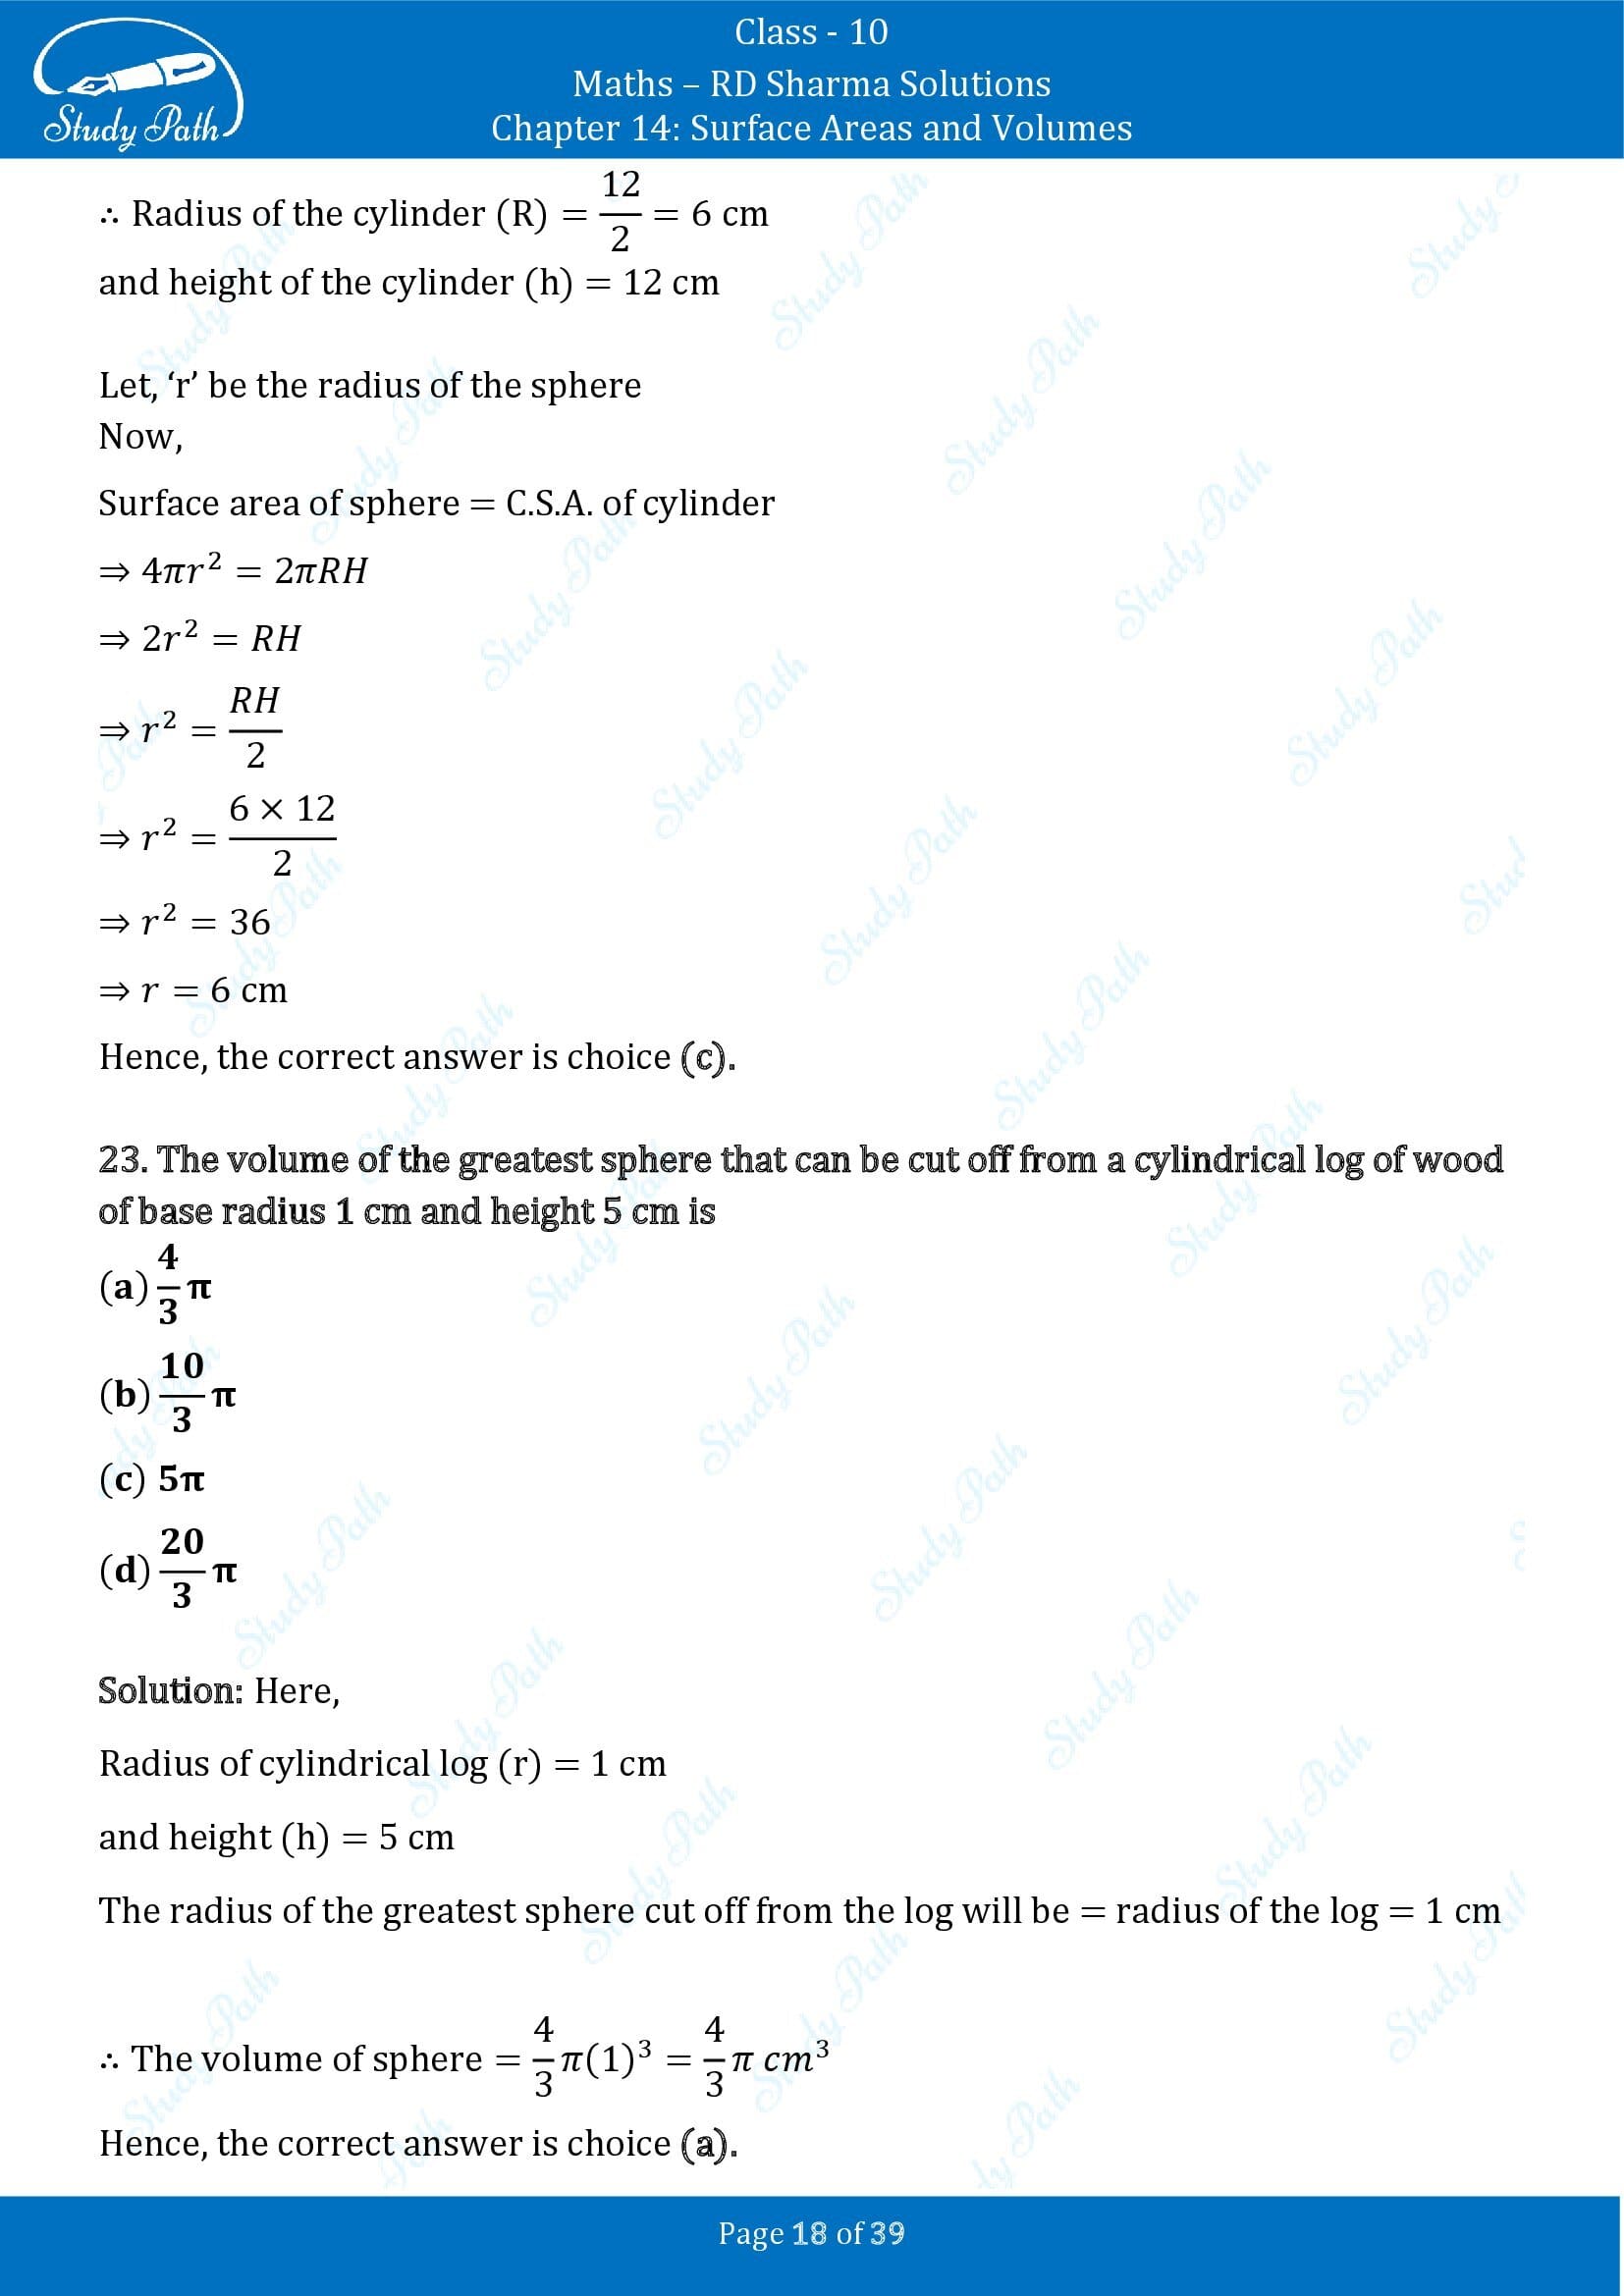 RD Sharma Solutions Class 10 Chapter 14 Surface Areas and Volumes Multiple Choice Question MCQs 00018